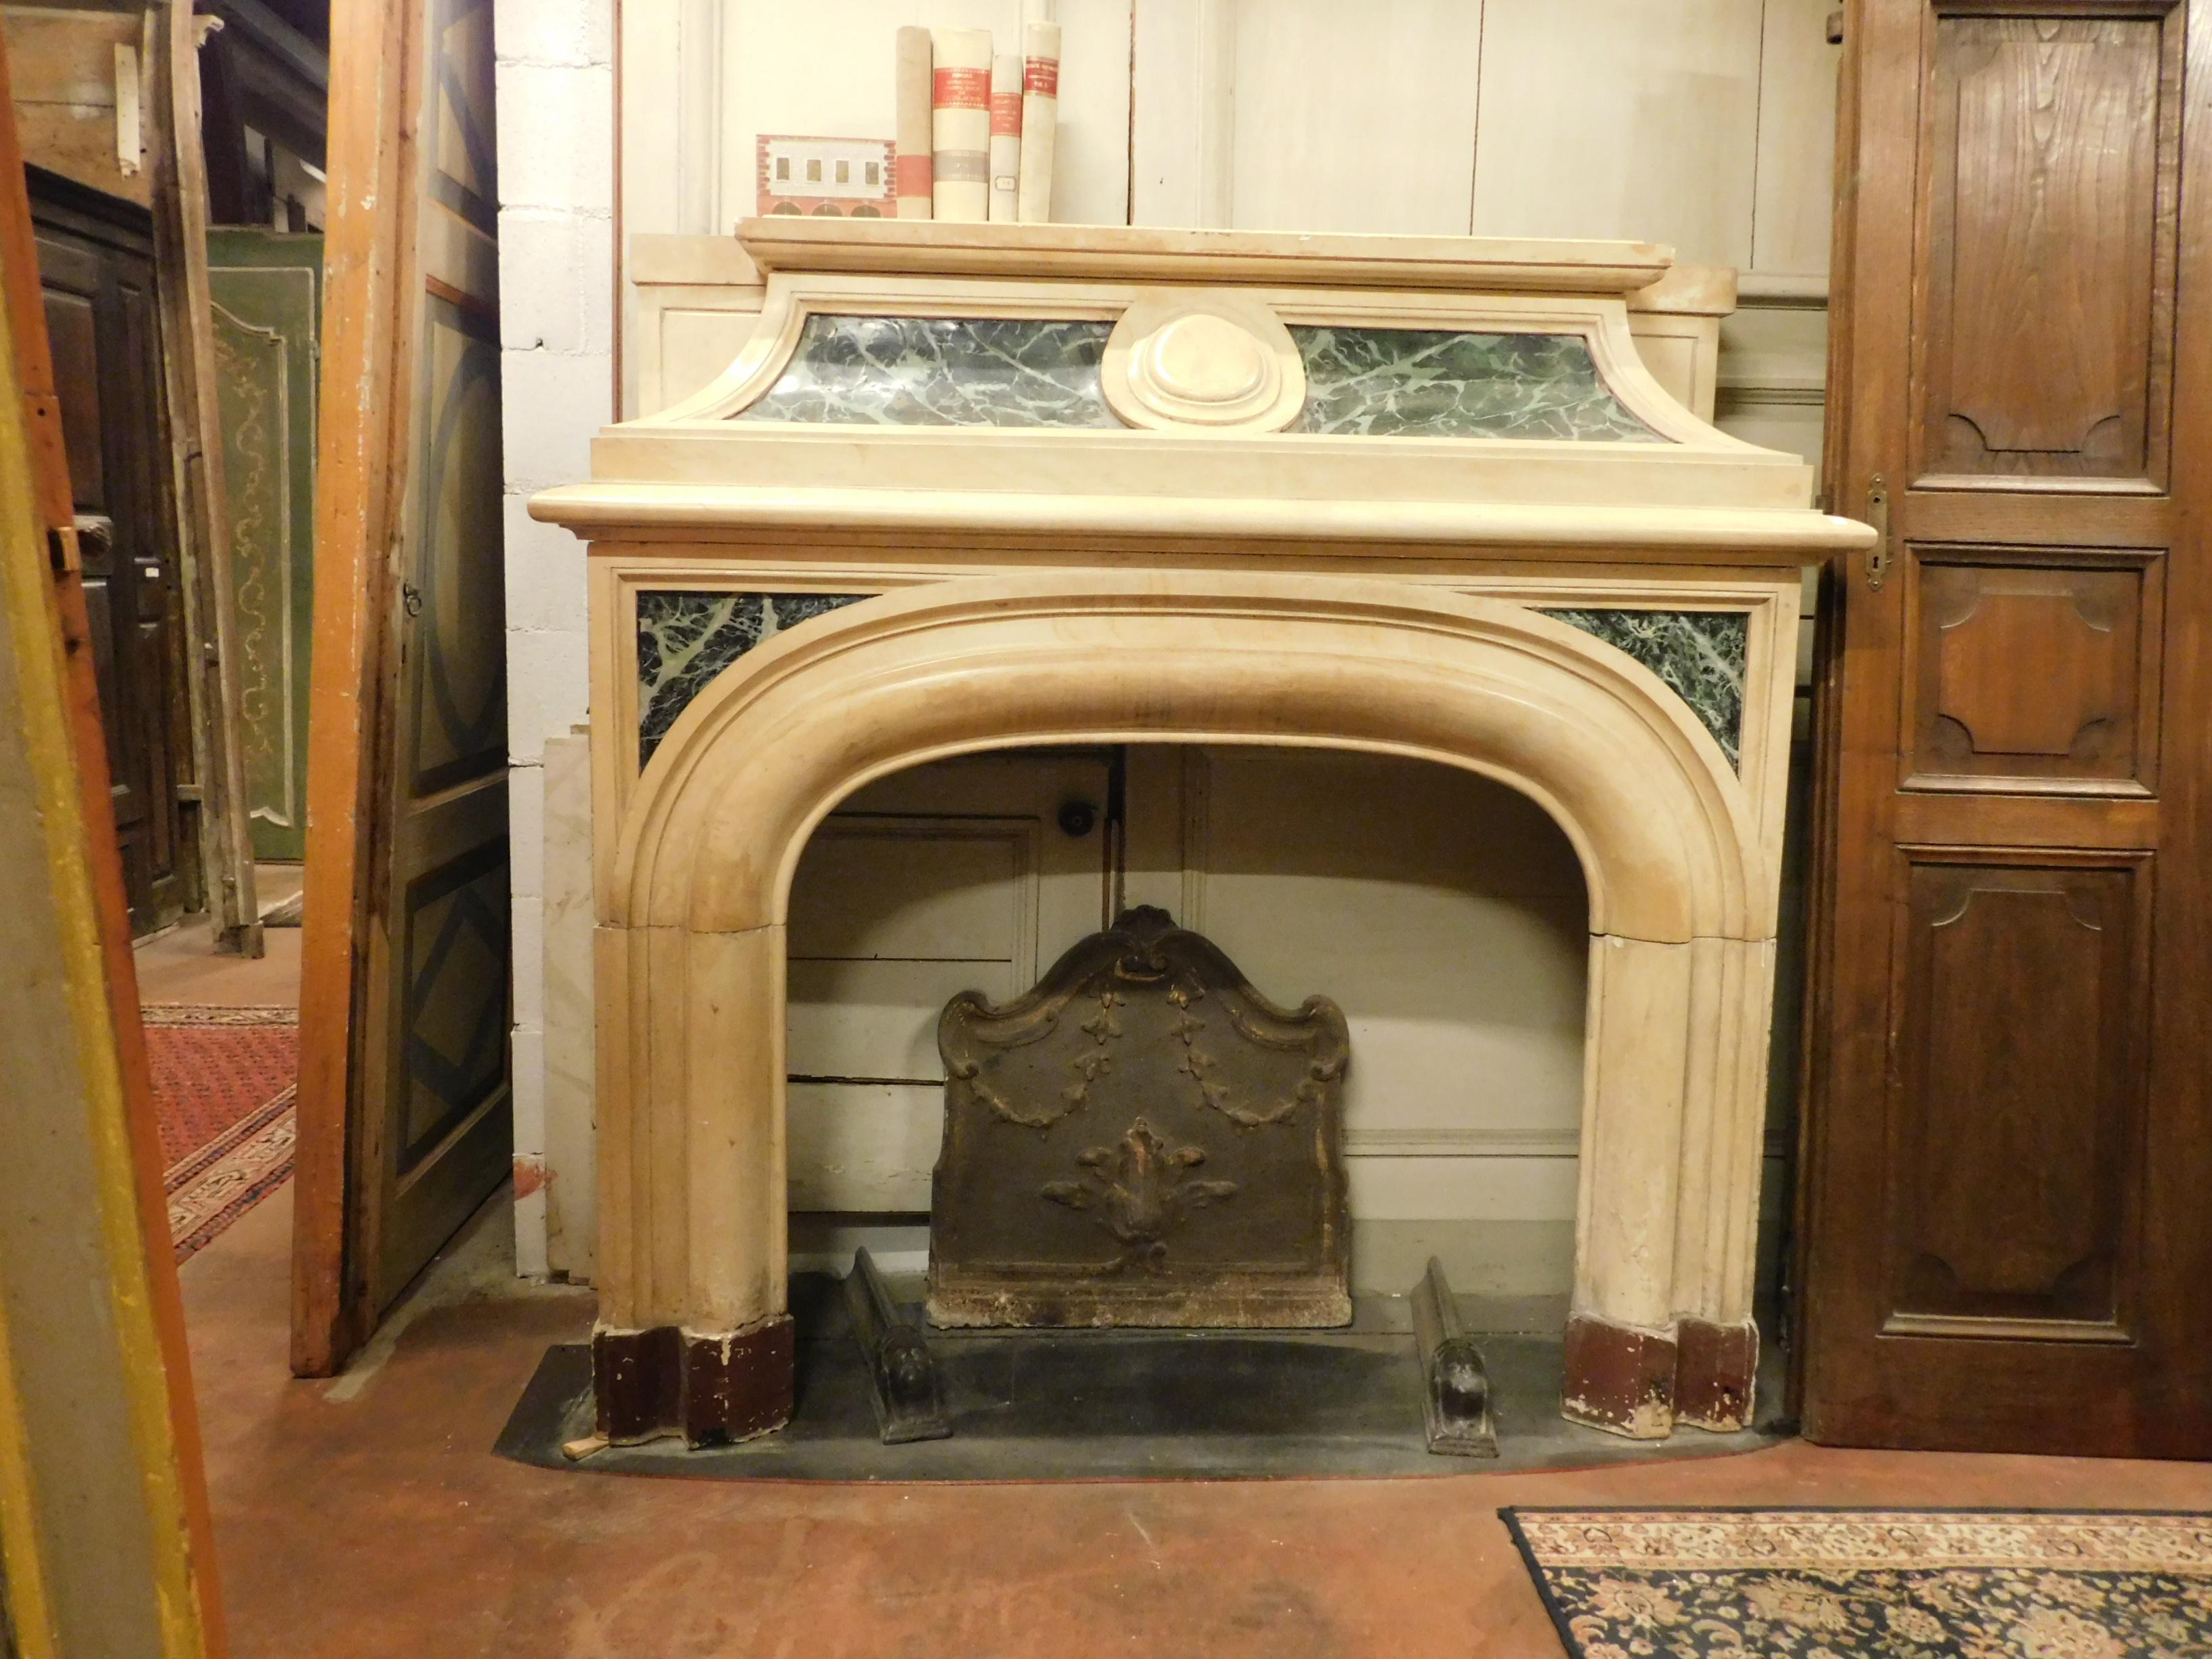 Antique fireplace in yellow marble, with green lacquered faux-marble parts, an important marble fireplace (covering the chimney) from a villa in Italy (Rome) in the 1800s, on the sides it has brass vents to make the fireplace 